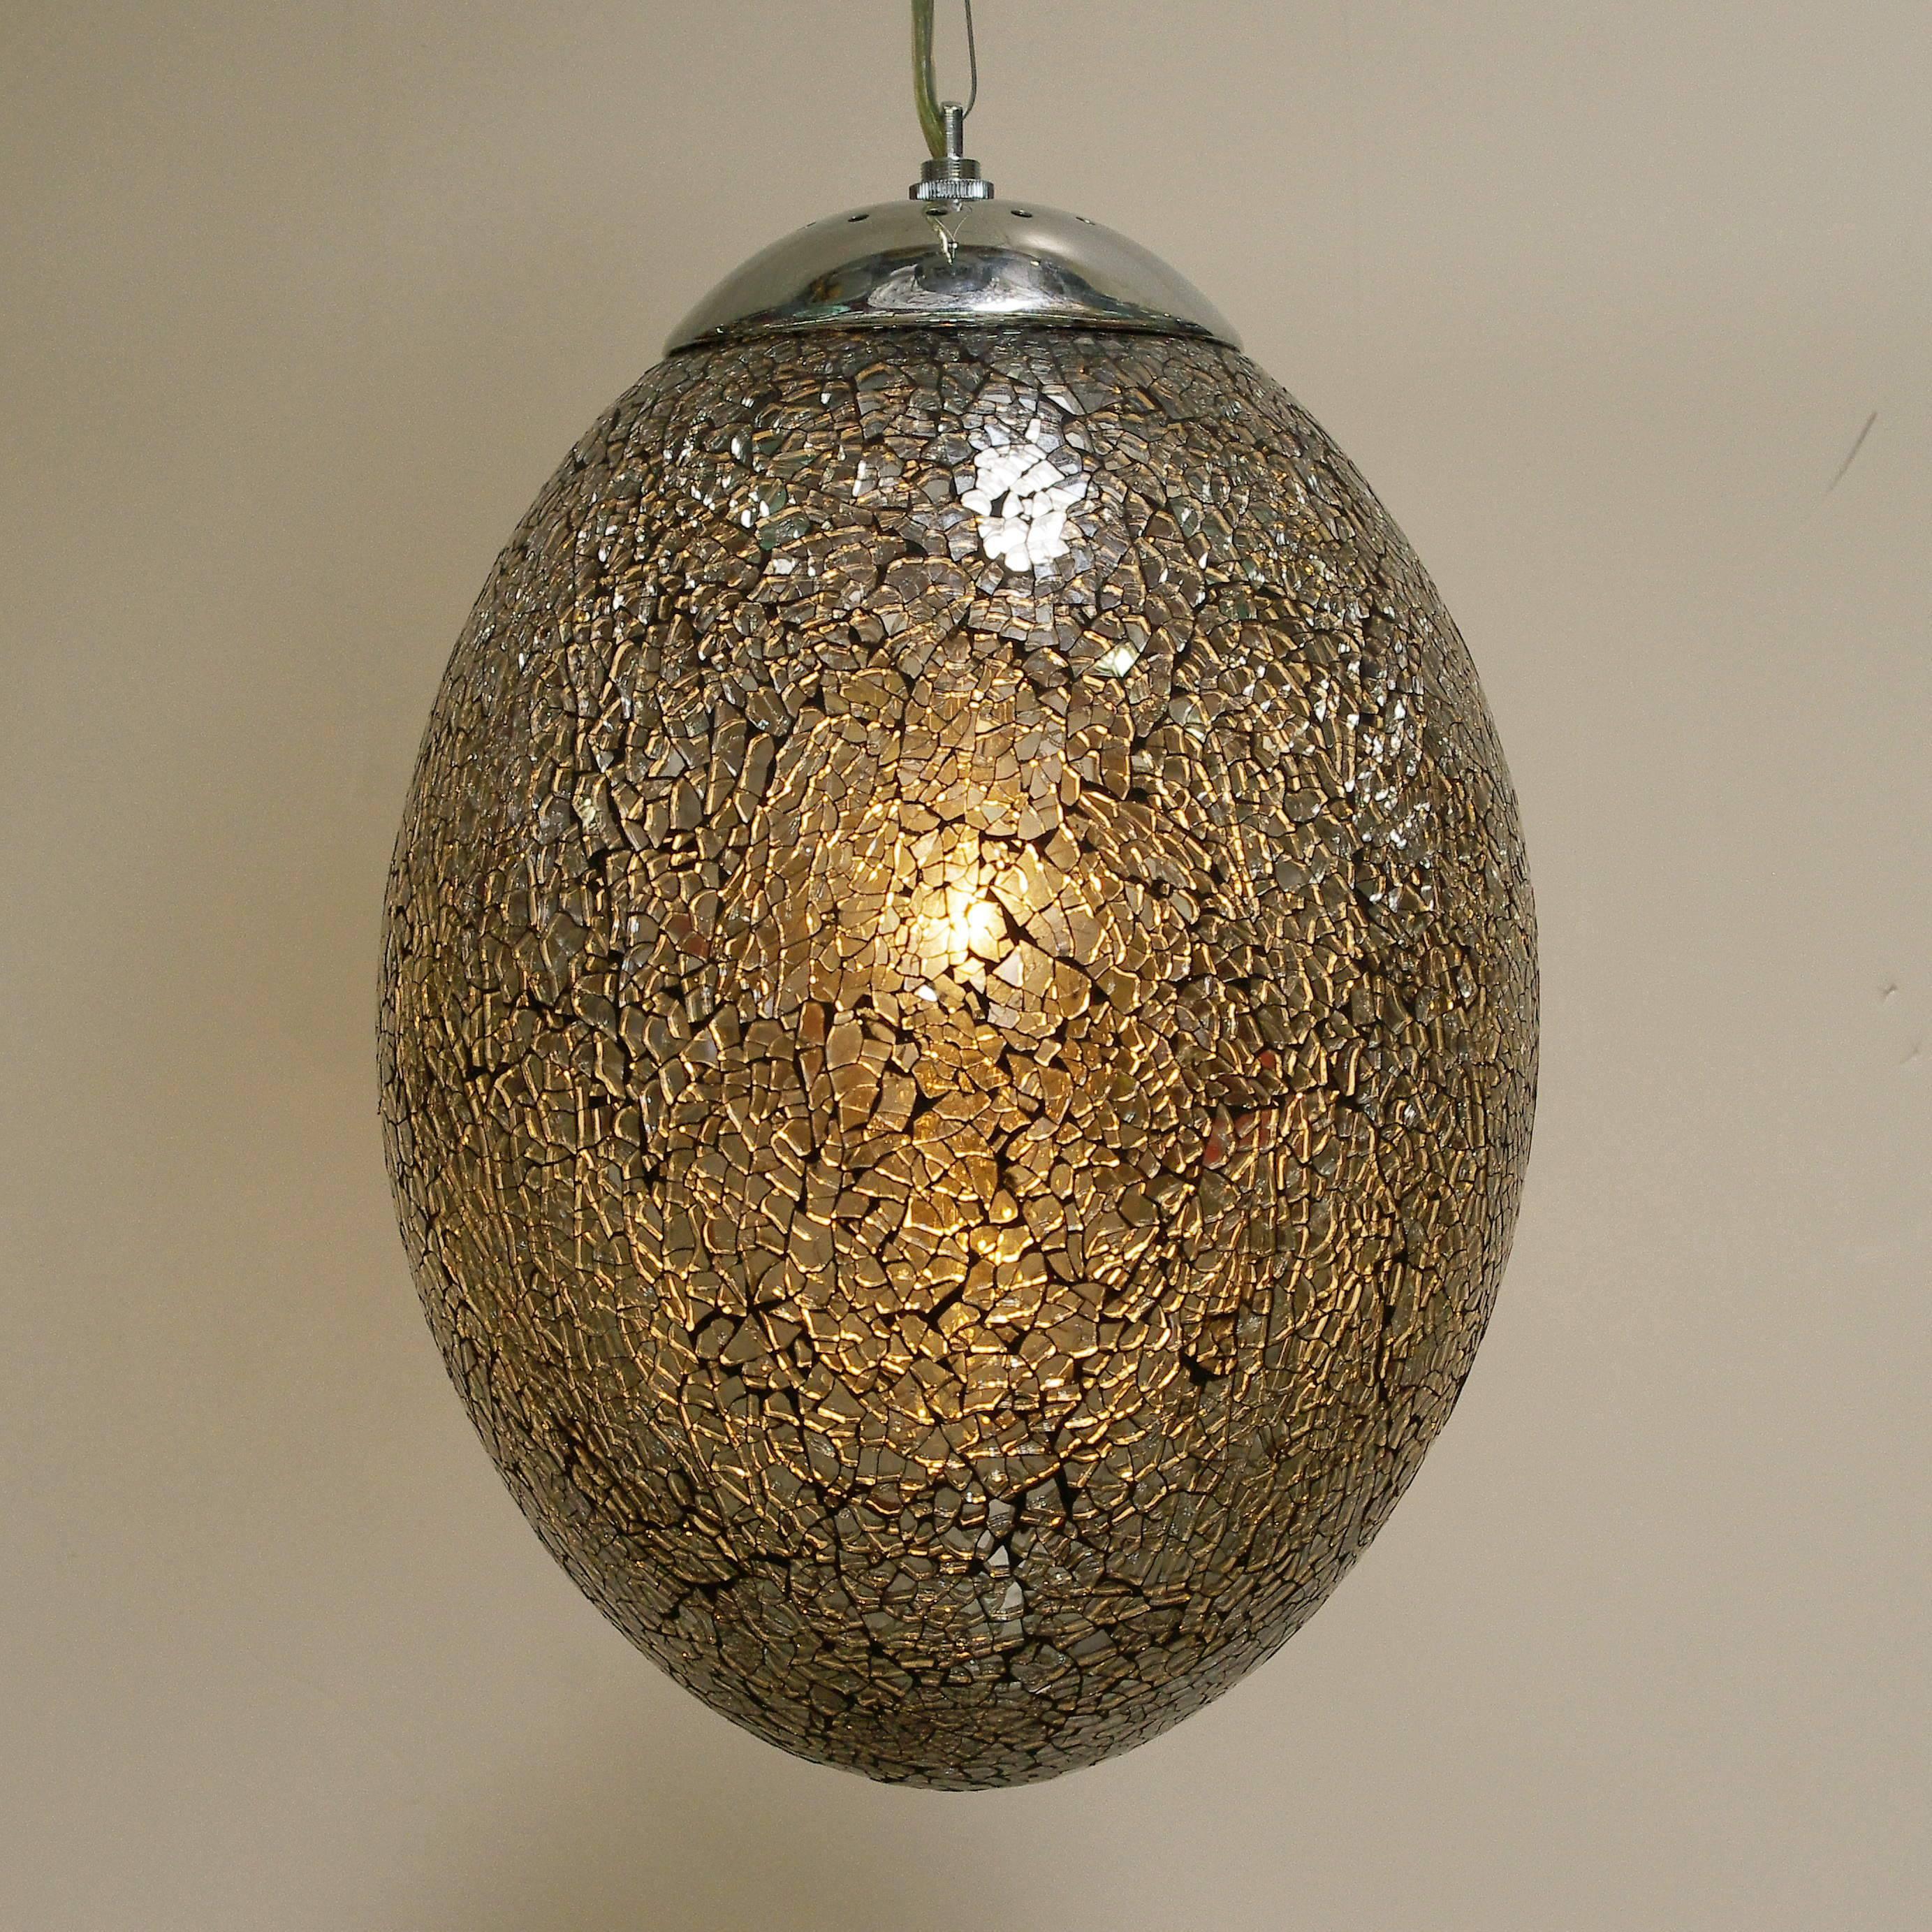 Crackled mirrored glass egg shaped pendants with chrome hardware / Designed by Fabio Bergomi for Fabio Ltd
1 light / E26 or E27 type / max 60W each
Diameter: 11 inches / Height: 17 inches plus chain and canopy
12 in stock in Palm Springs ON FINAL